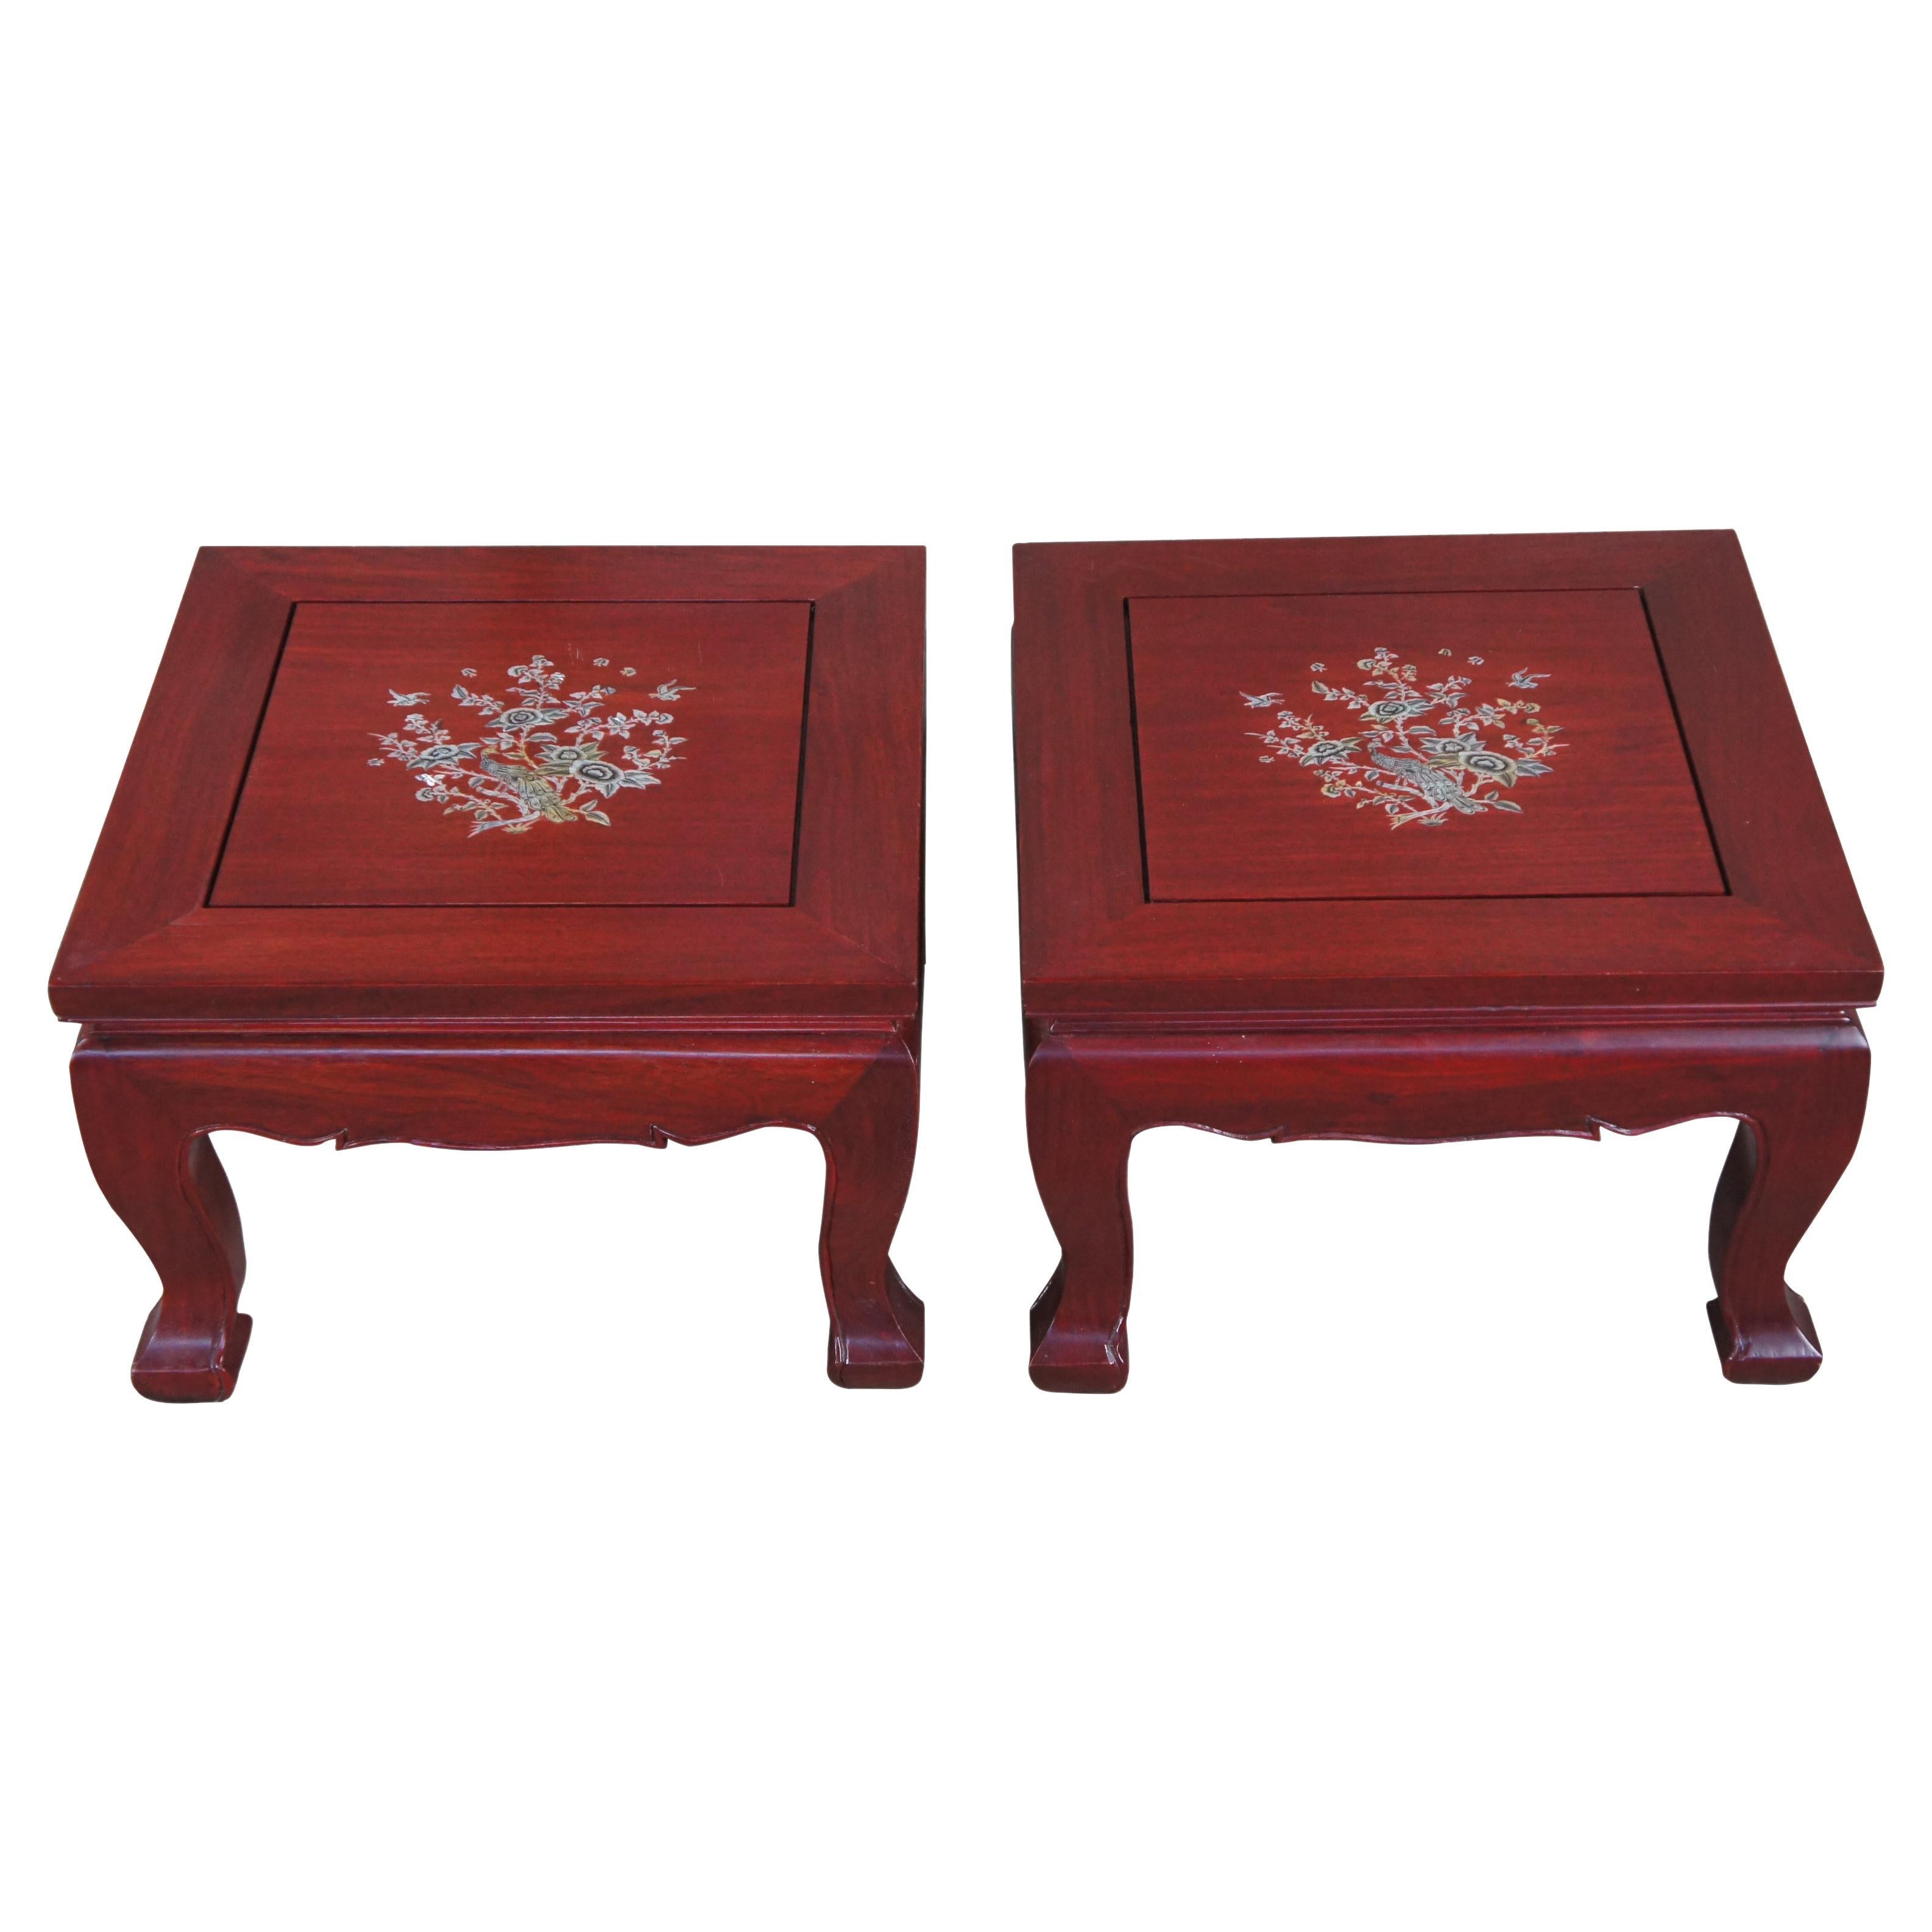 Chinese Chinoiserie Rosewood Inlaid Mother of Pearl Tables Stool Pedestal Stands For Sale